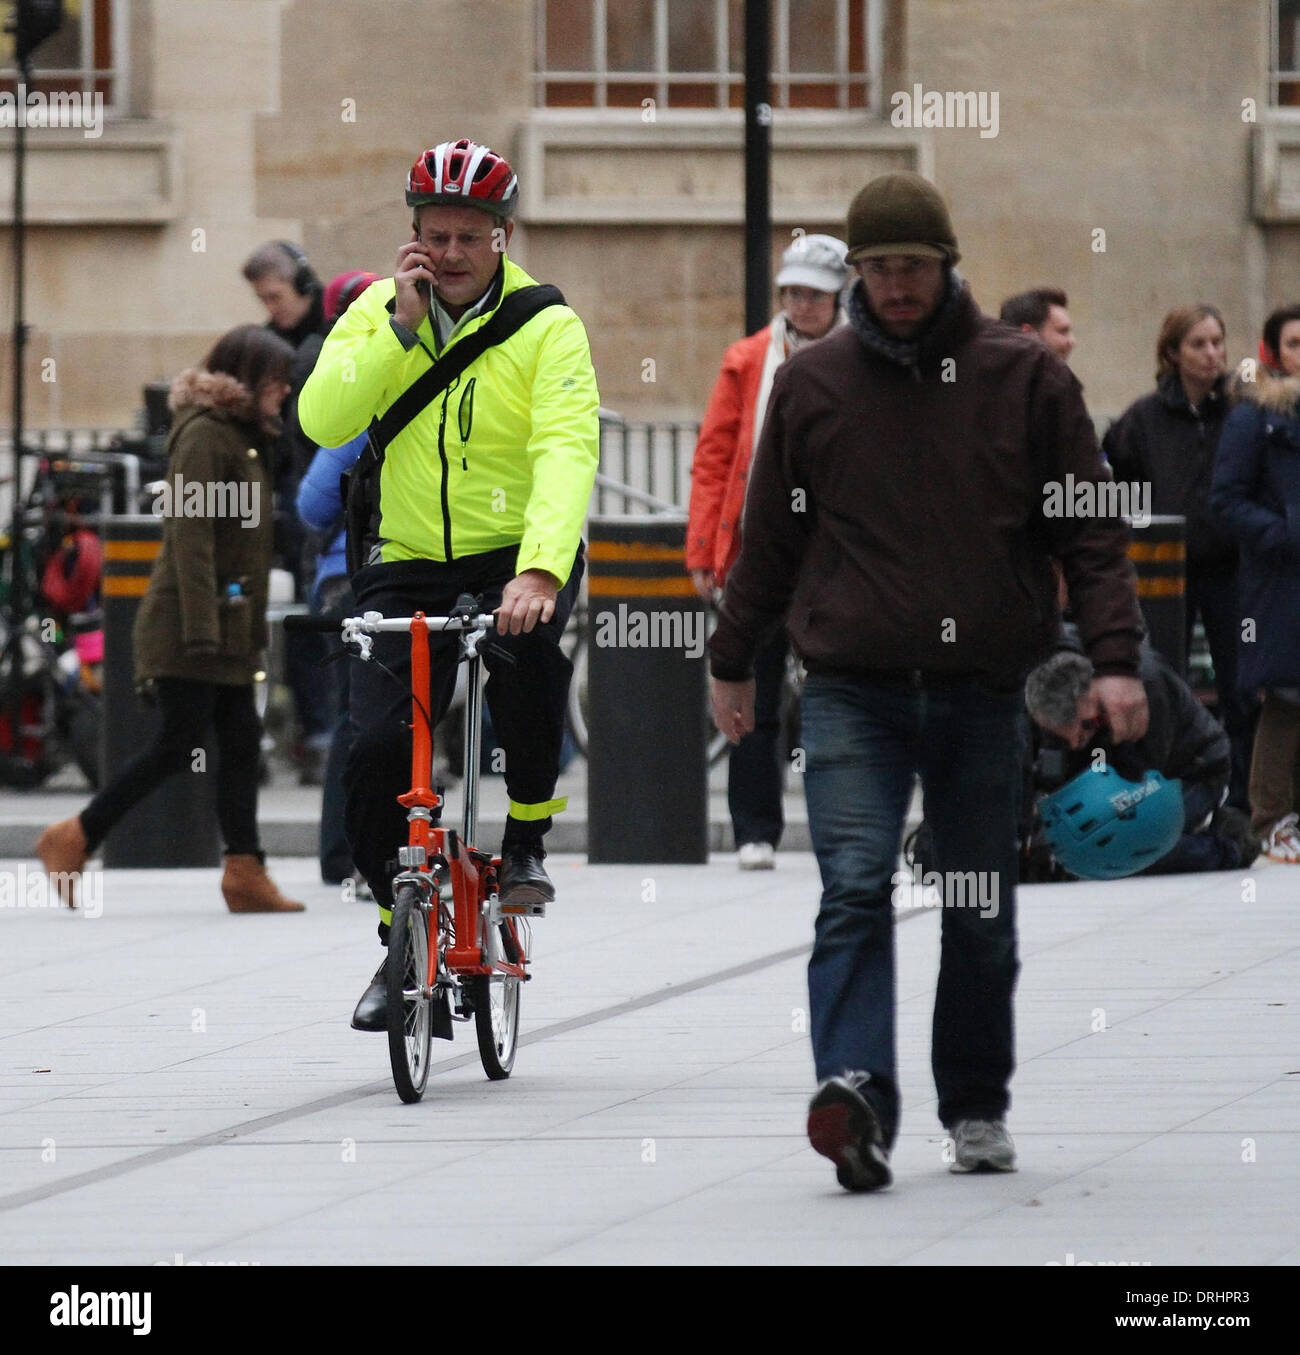 London, UK, 26th January 2014. Hugh Bonneville riding a bicycle while filming at the BBC, Broadcasting House in London, UK © Sim Stock Photo